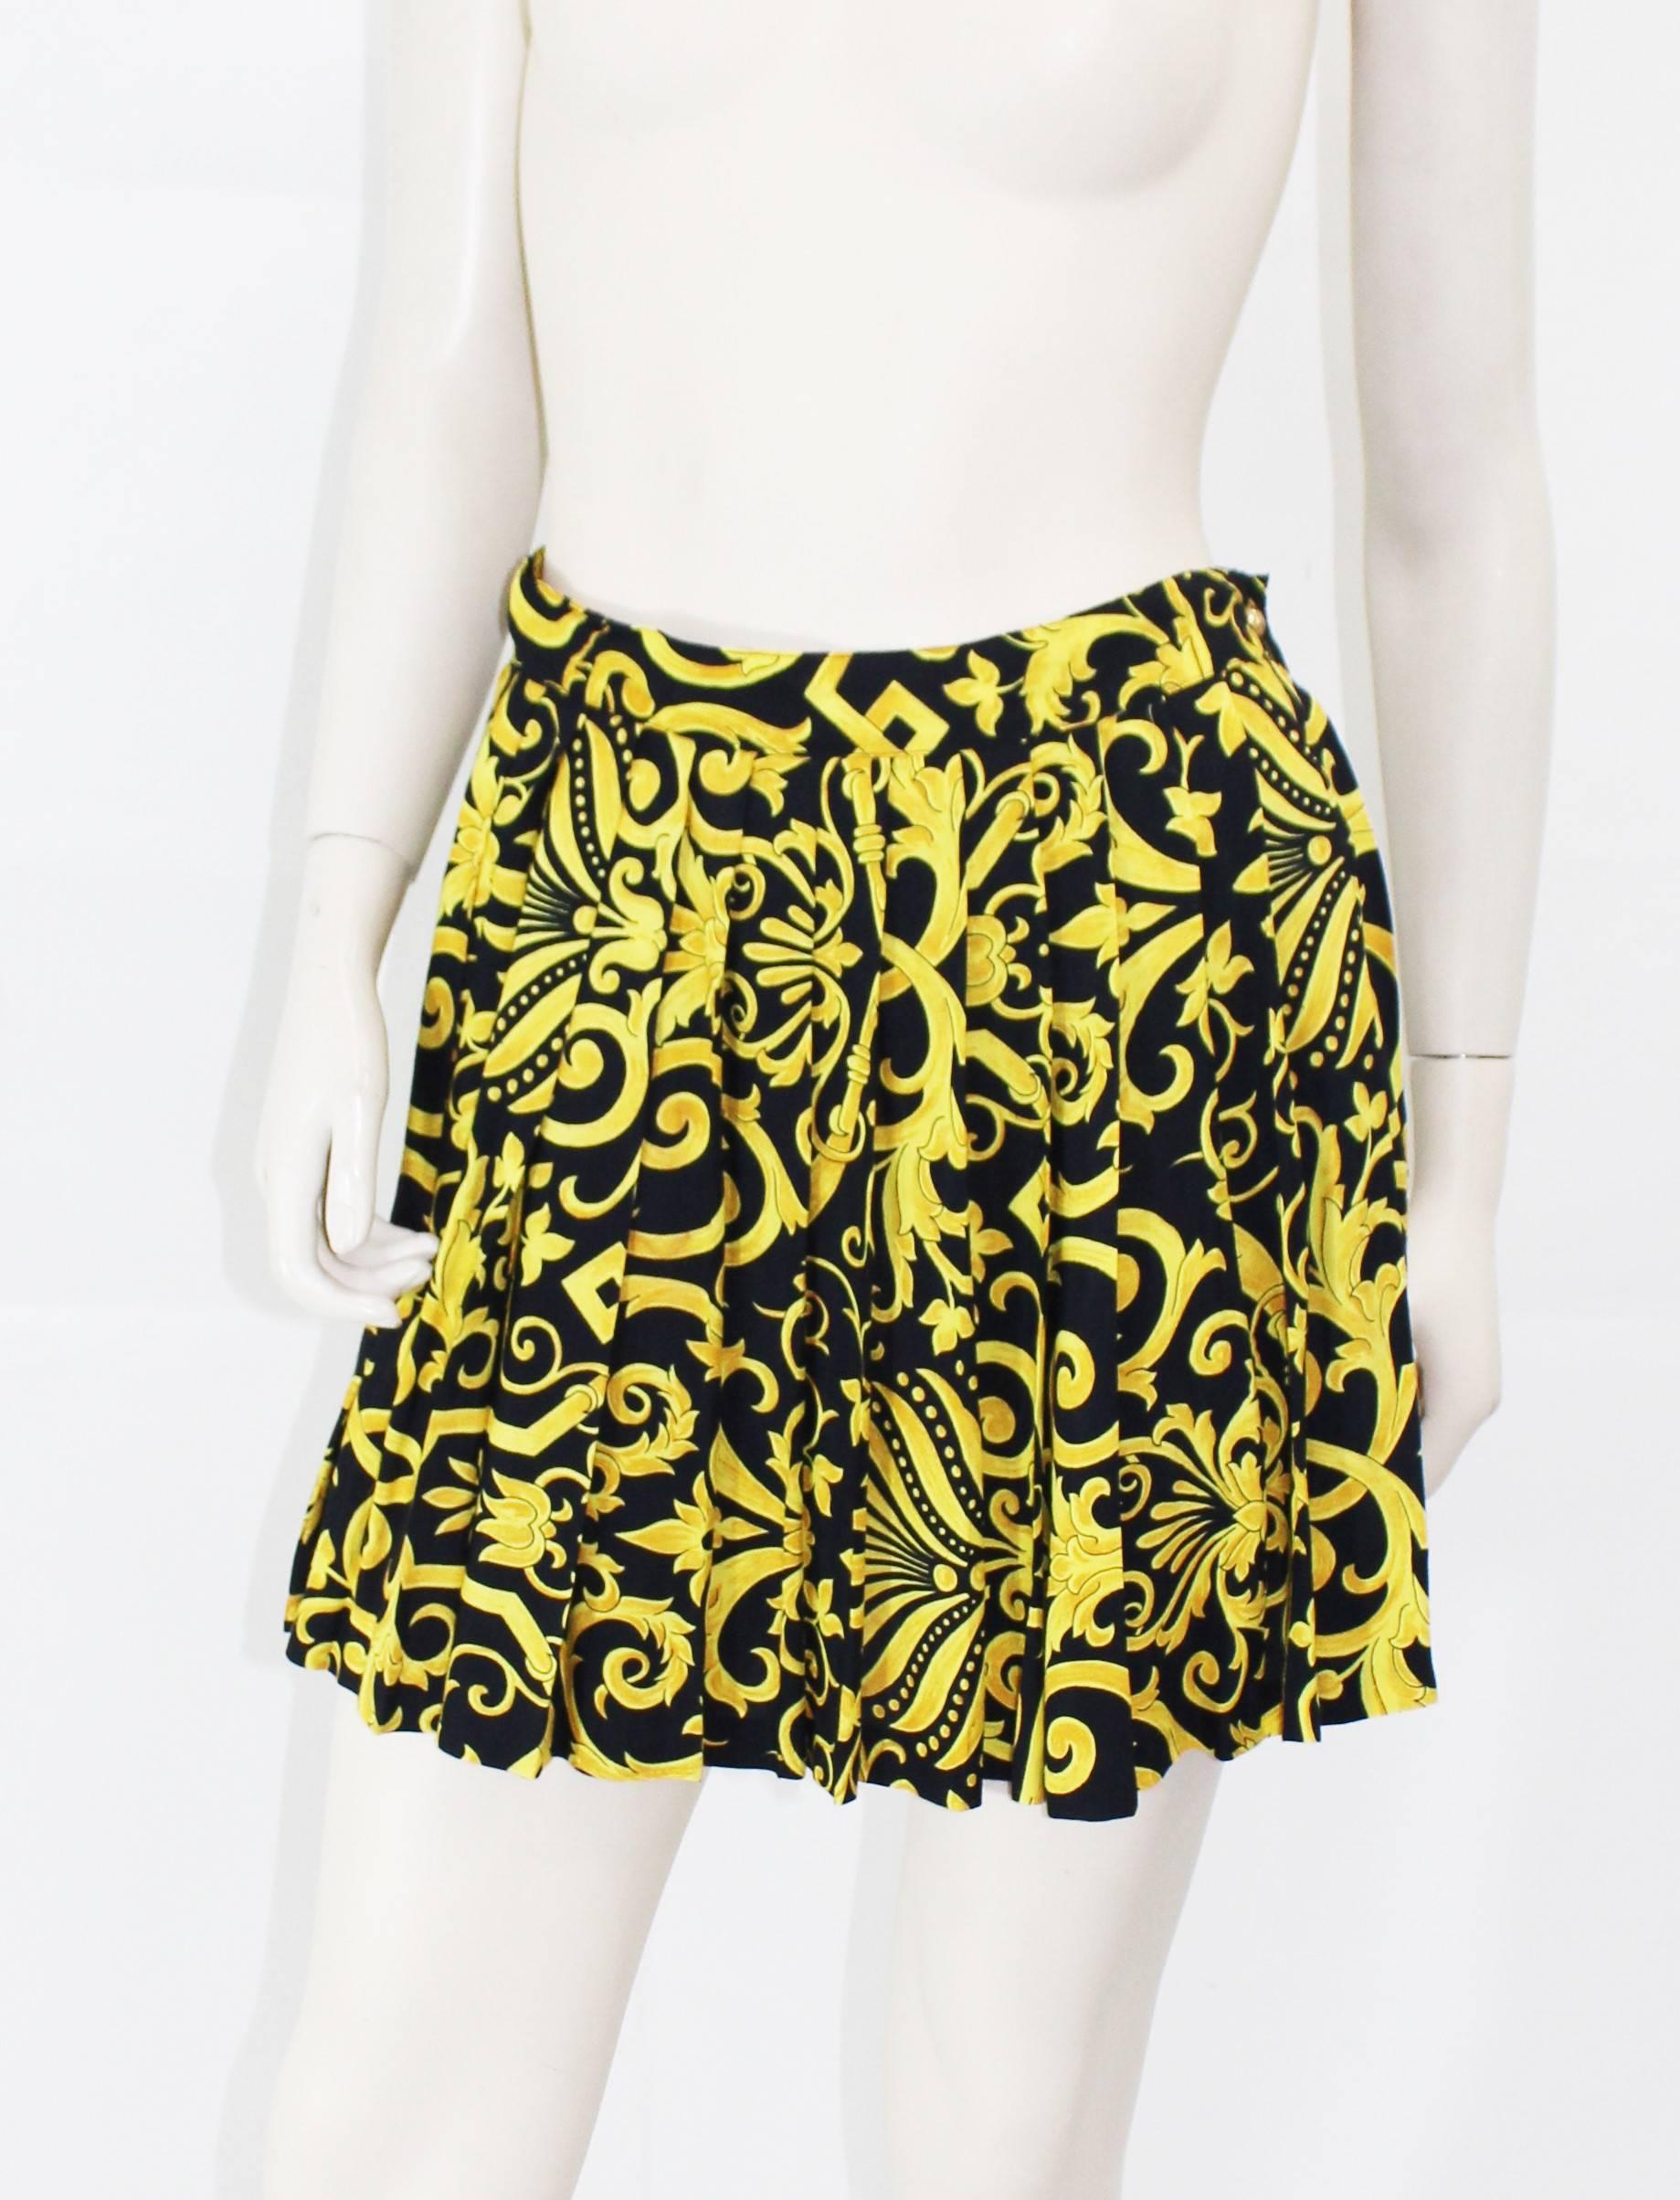 Pristine Condition 1990's Gianni Versace  Vintage  Black and Yellow Pleated Skirt. Viscose fabric. Not lined. Perfect for cruise or hot summer day. Size 36.
Waist  28" length 16"